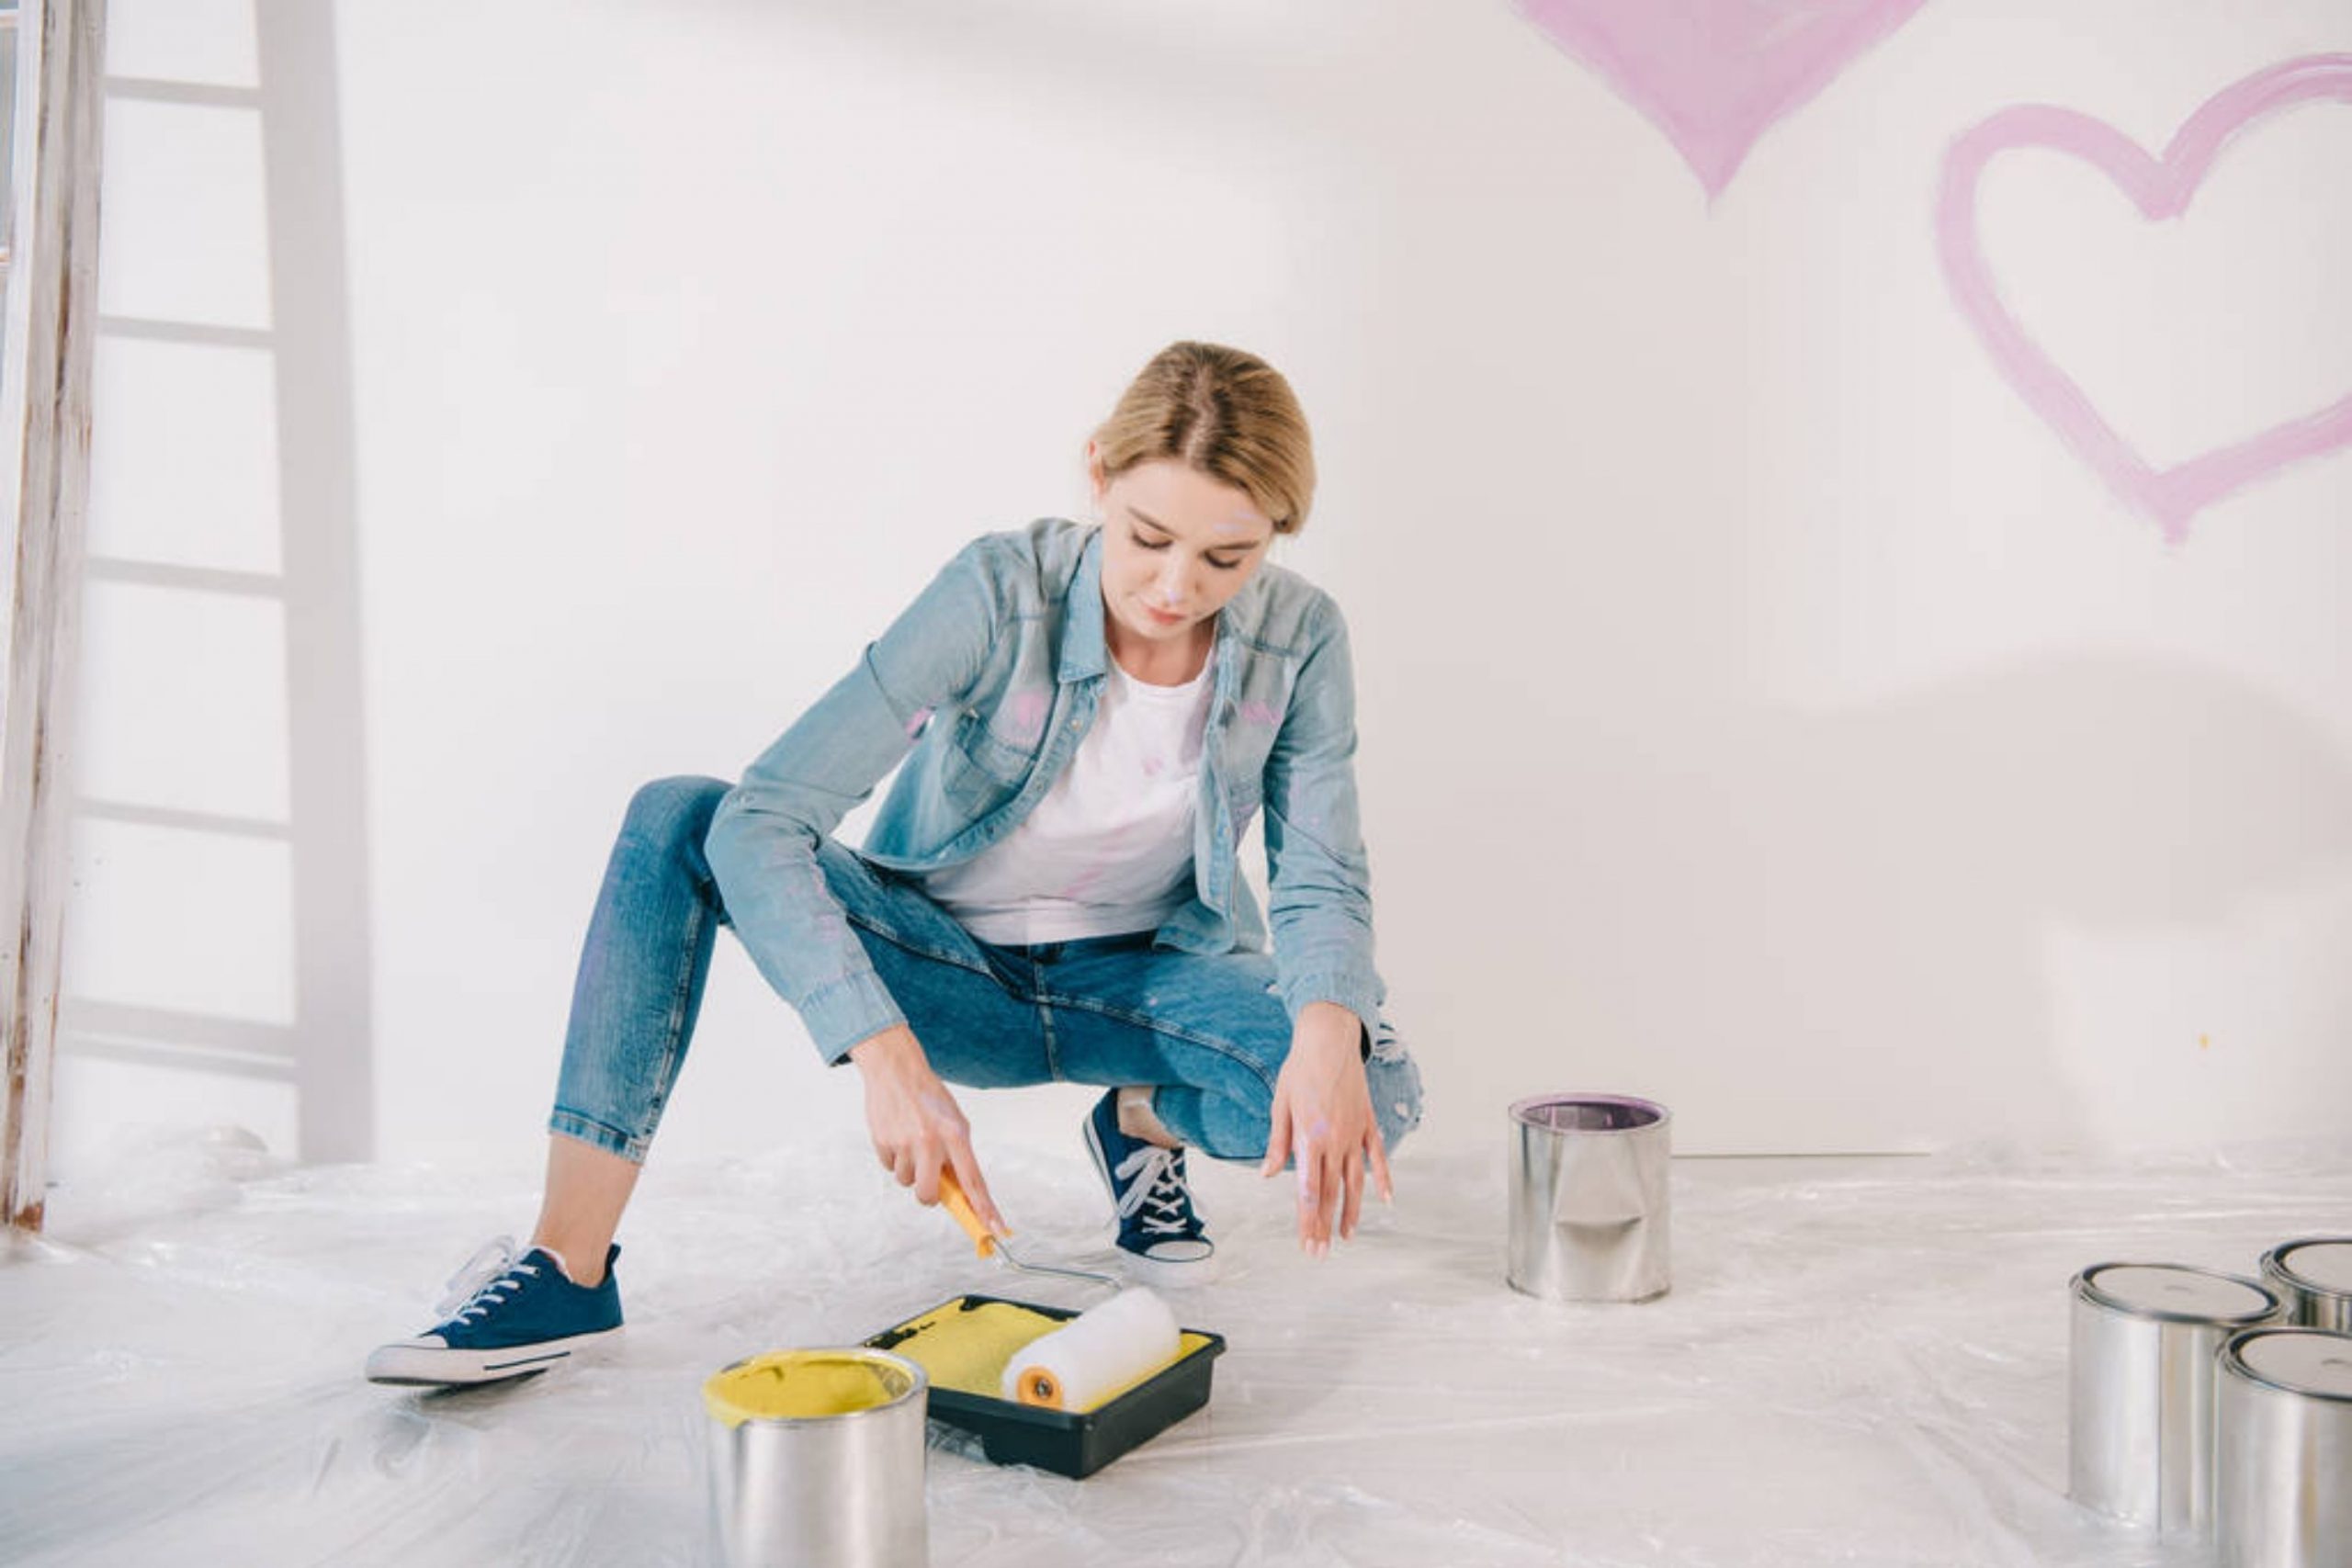 How to Paint Uneven Walls Correctly